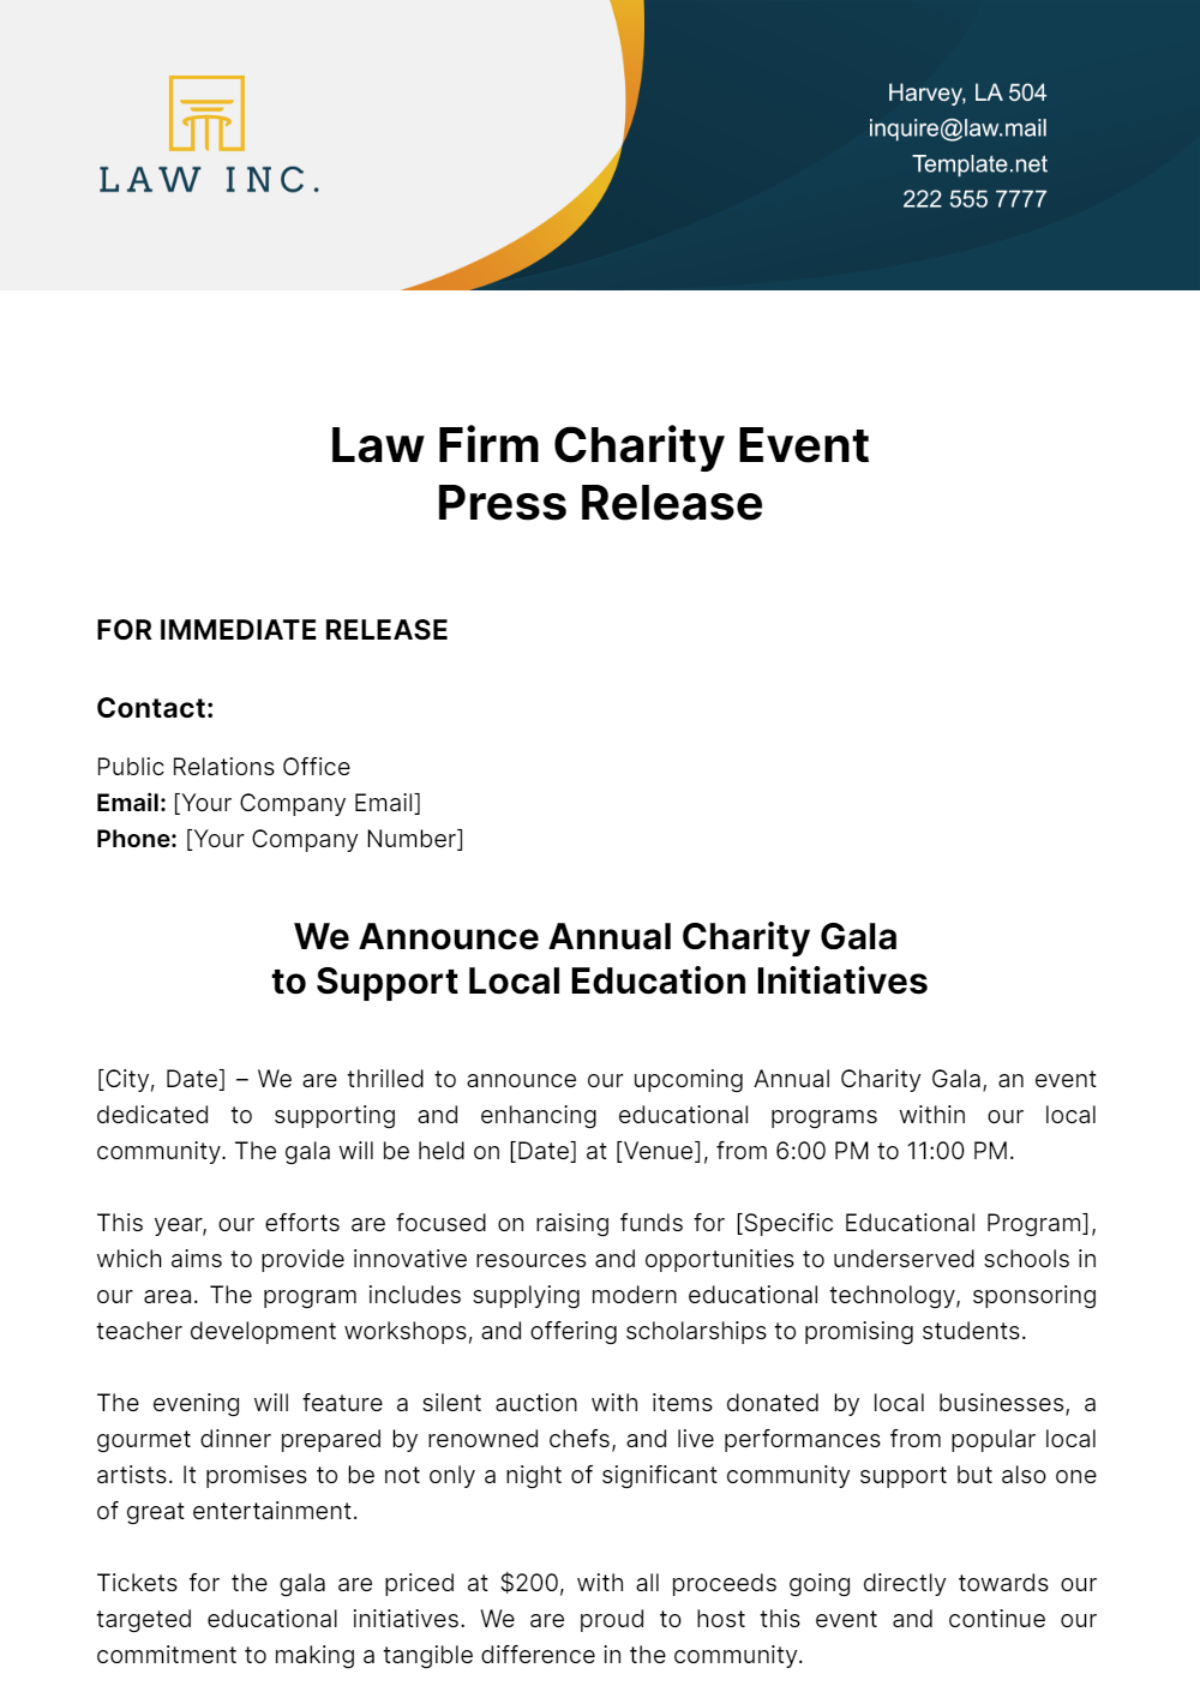 Law Firm Charity Event Press Release Template